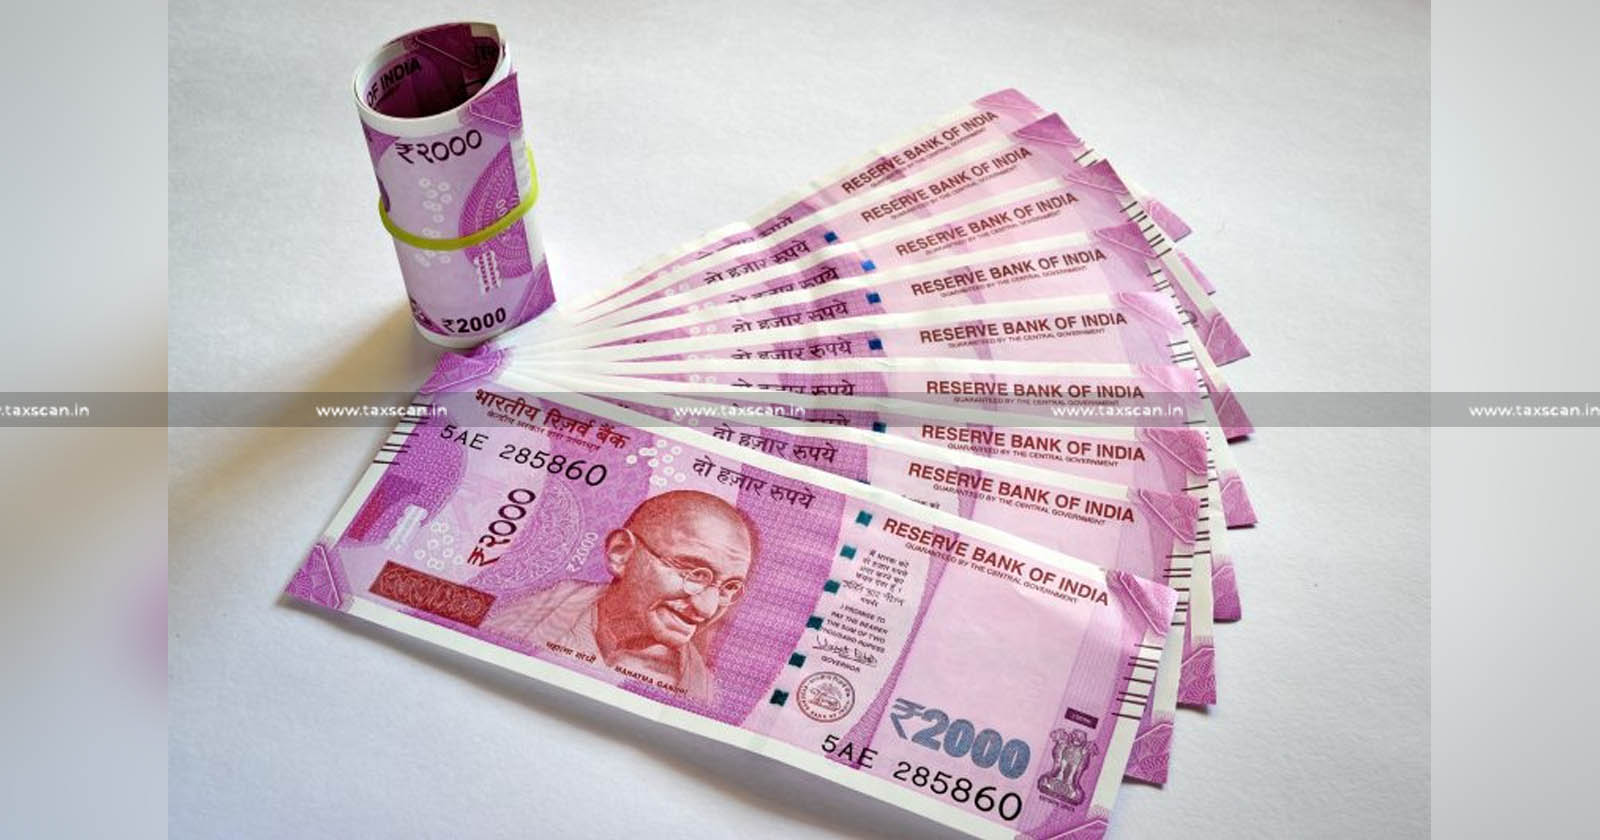 RBI extends time limit to Deposit - Exchange 2000 Rupee notes till October 7 [Read Press Release] - TAXSCAN